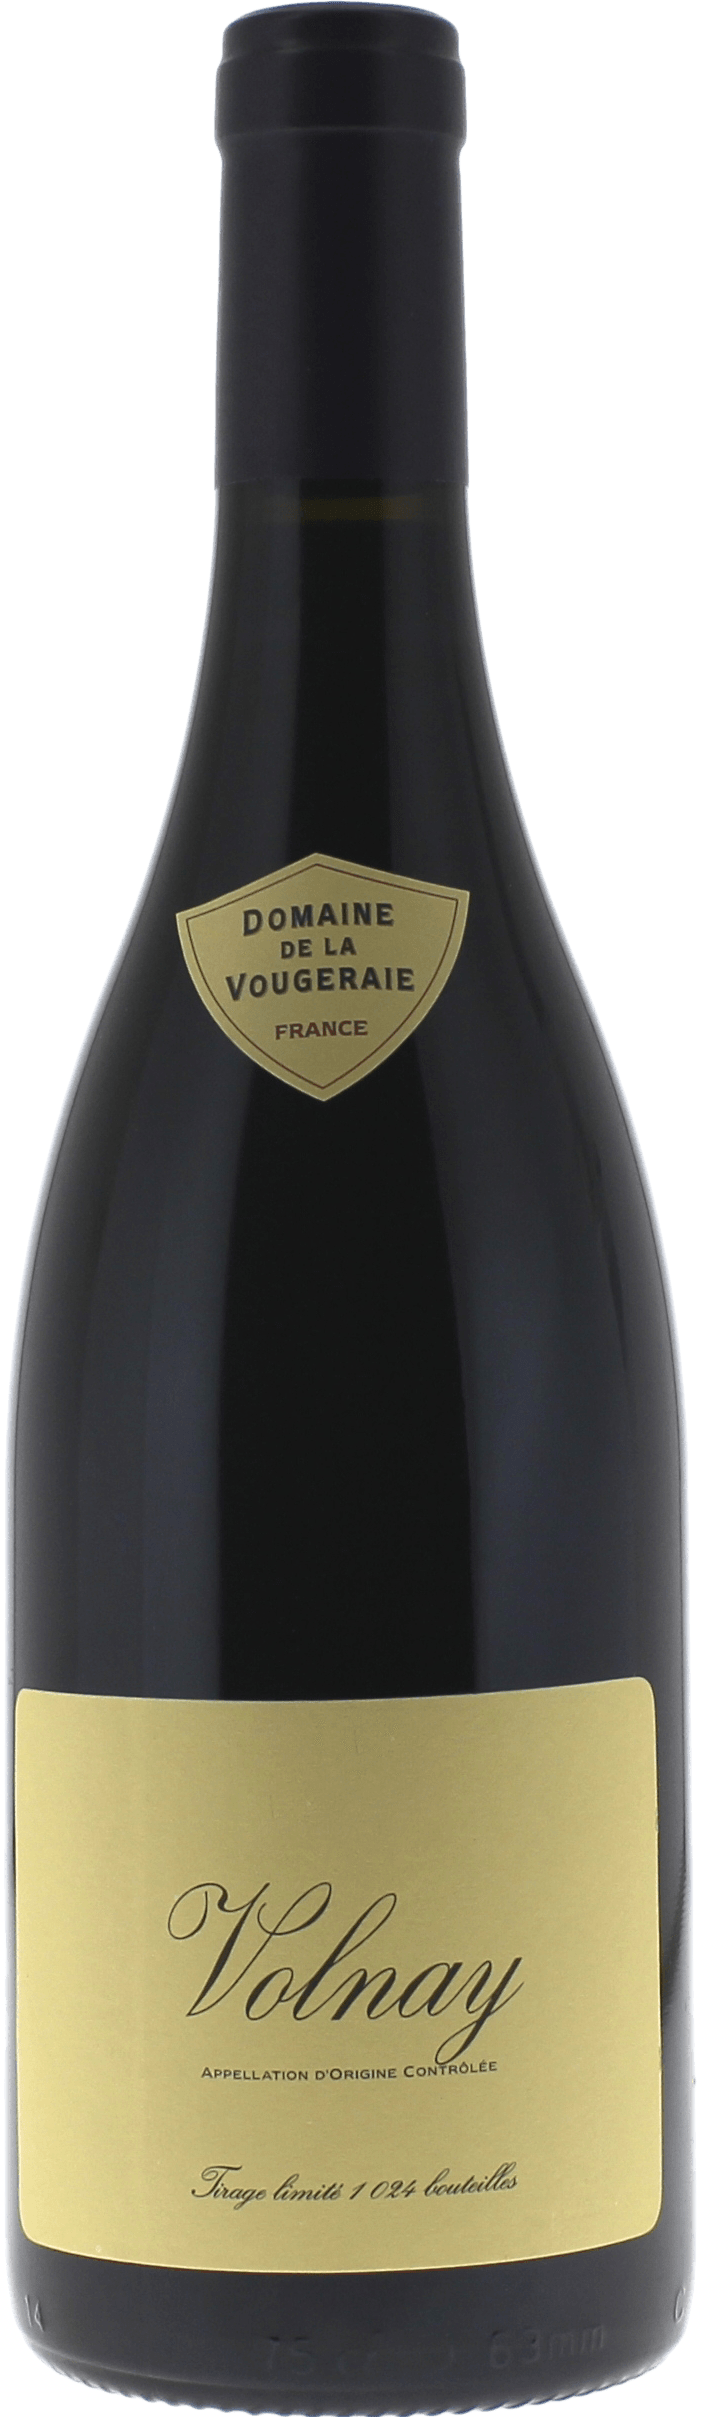 Volnay 2018 Domaine VOUGERAIE, Bourgogne rouge